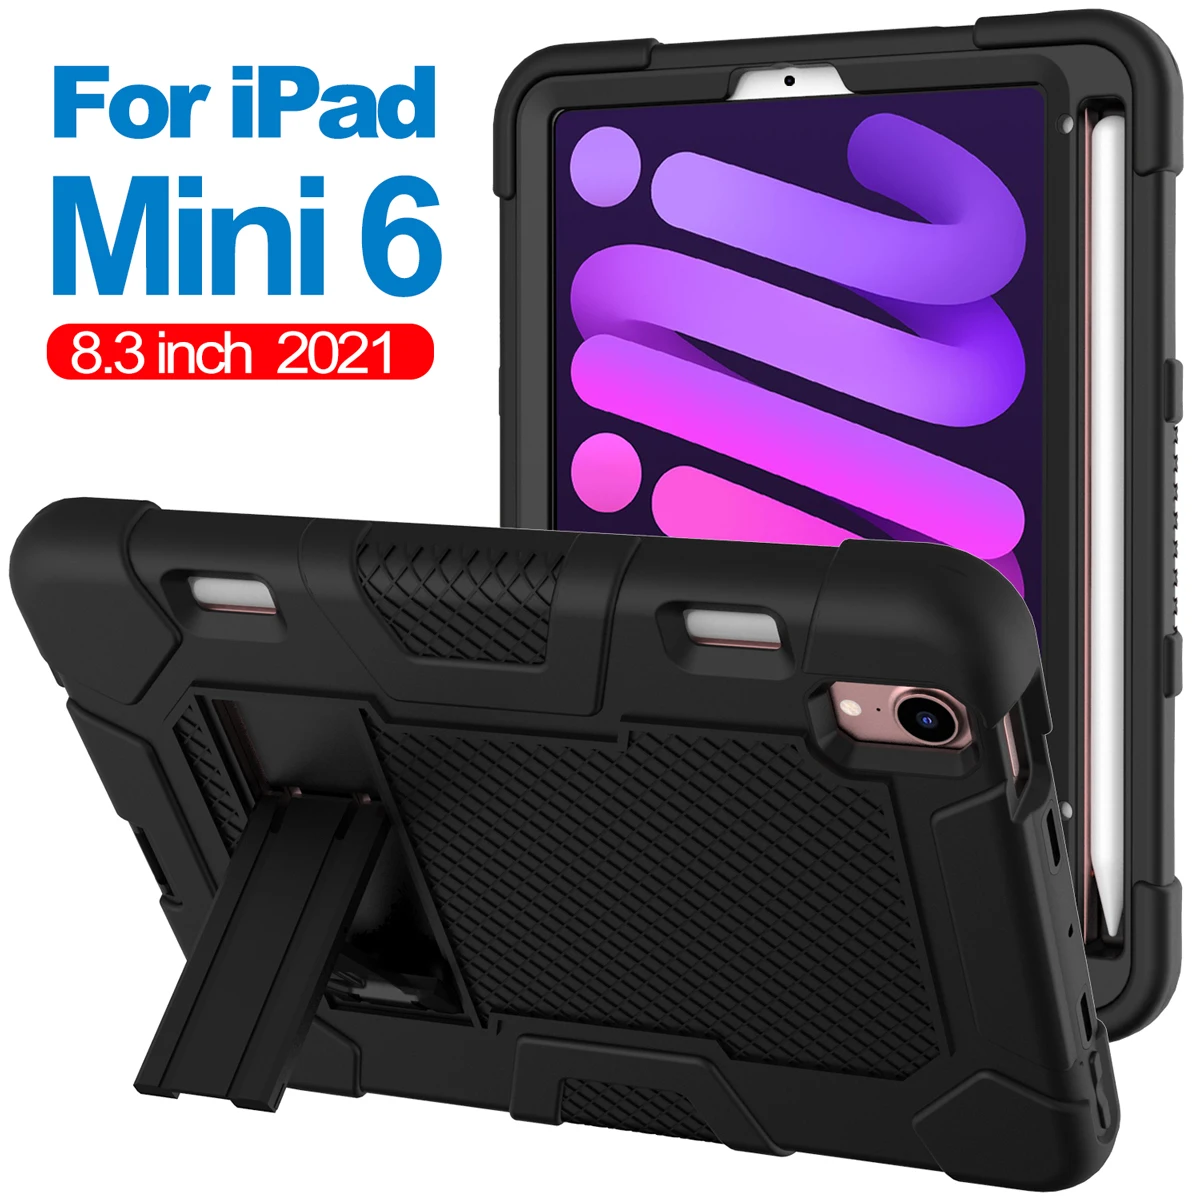 

Tablet Case For iPad Mini 6 2021 8.3 Inch Hybrid Armored Silicon Shockproof Rugged Drop Protective Cover with Kickstand